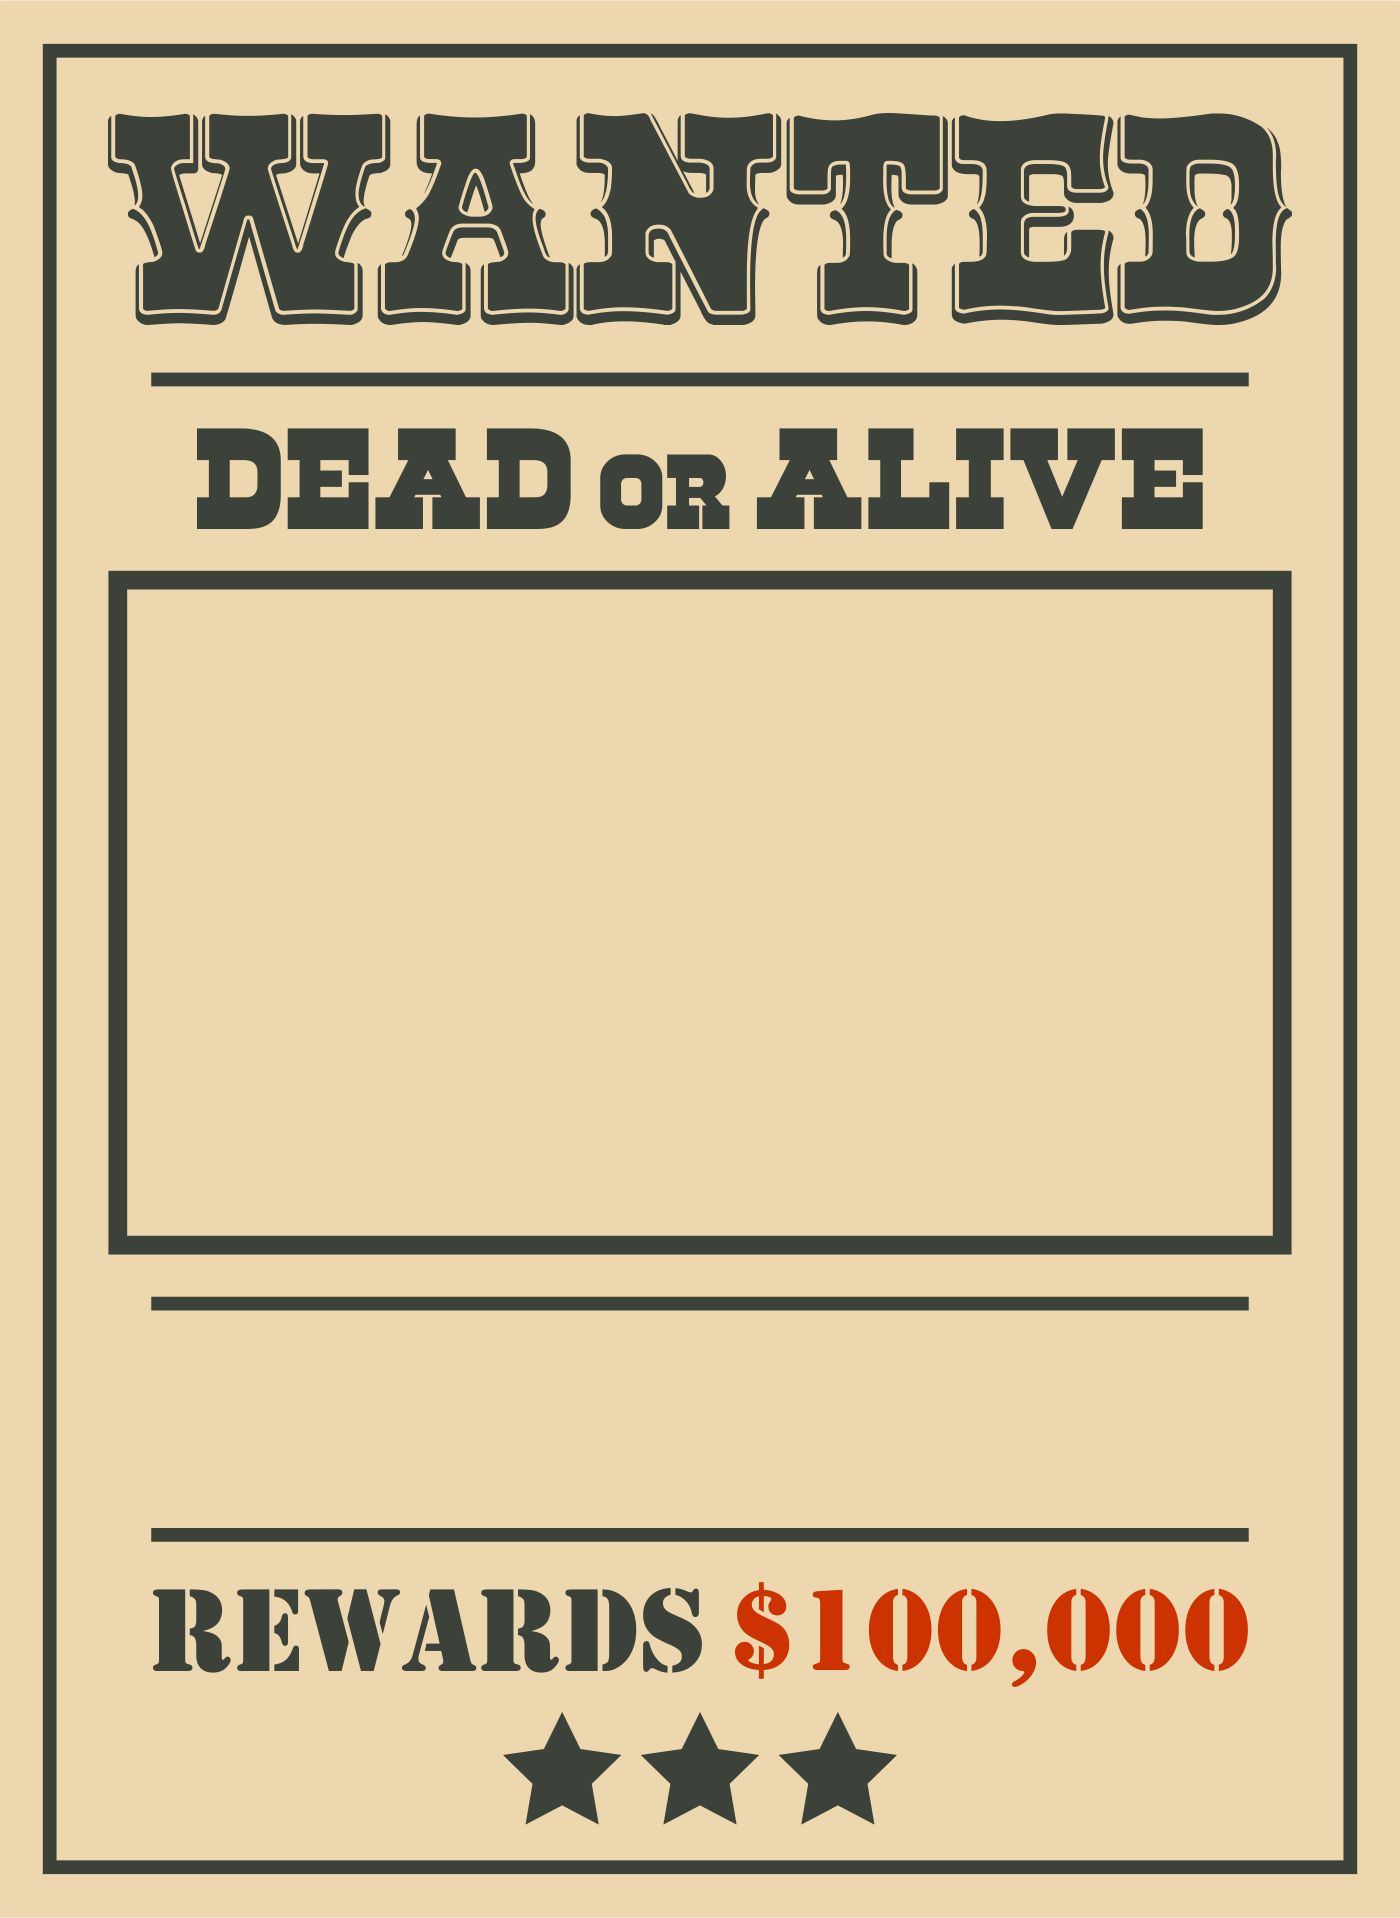 10 Best Old West Wanted Posters Printable PDF for Free at Printablee